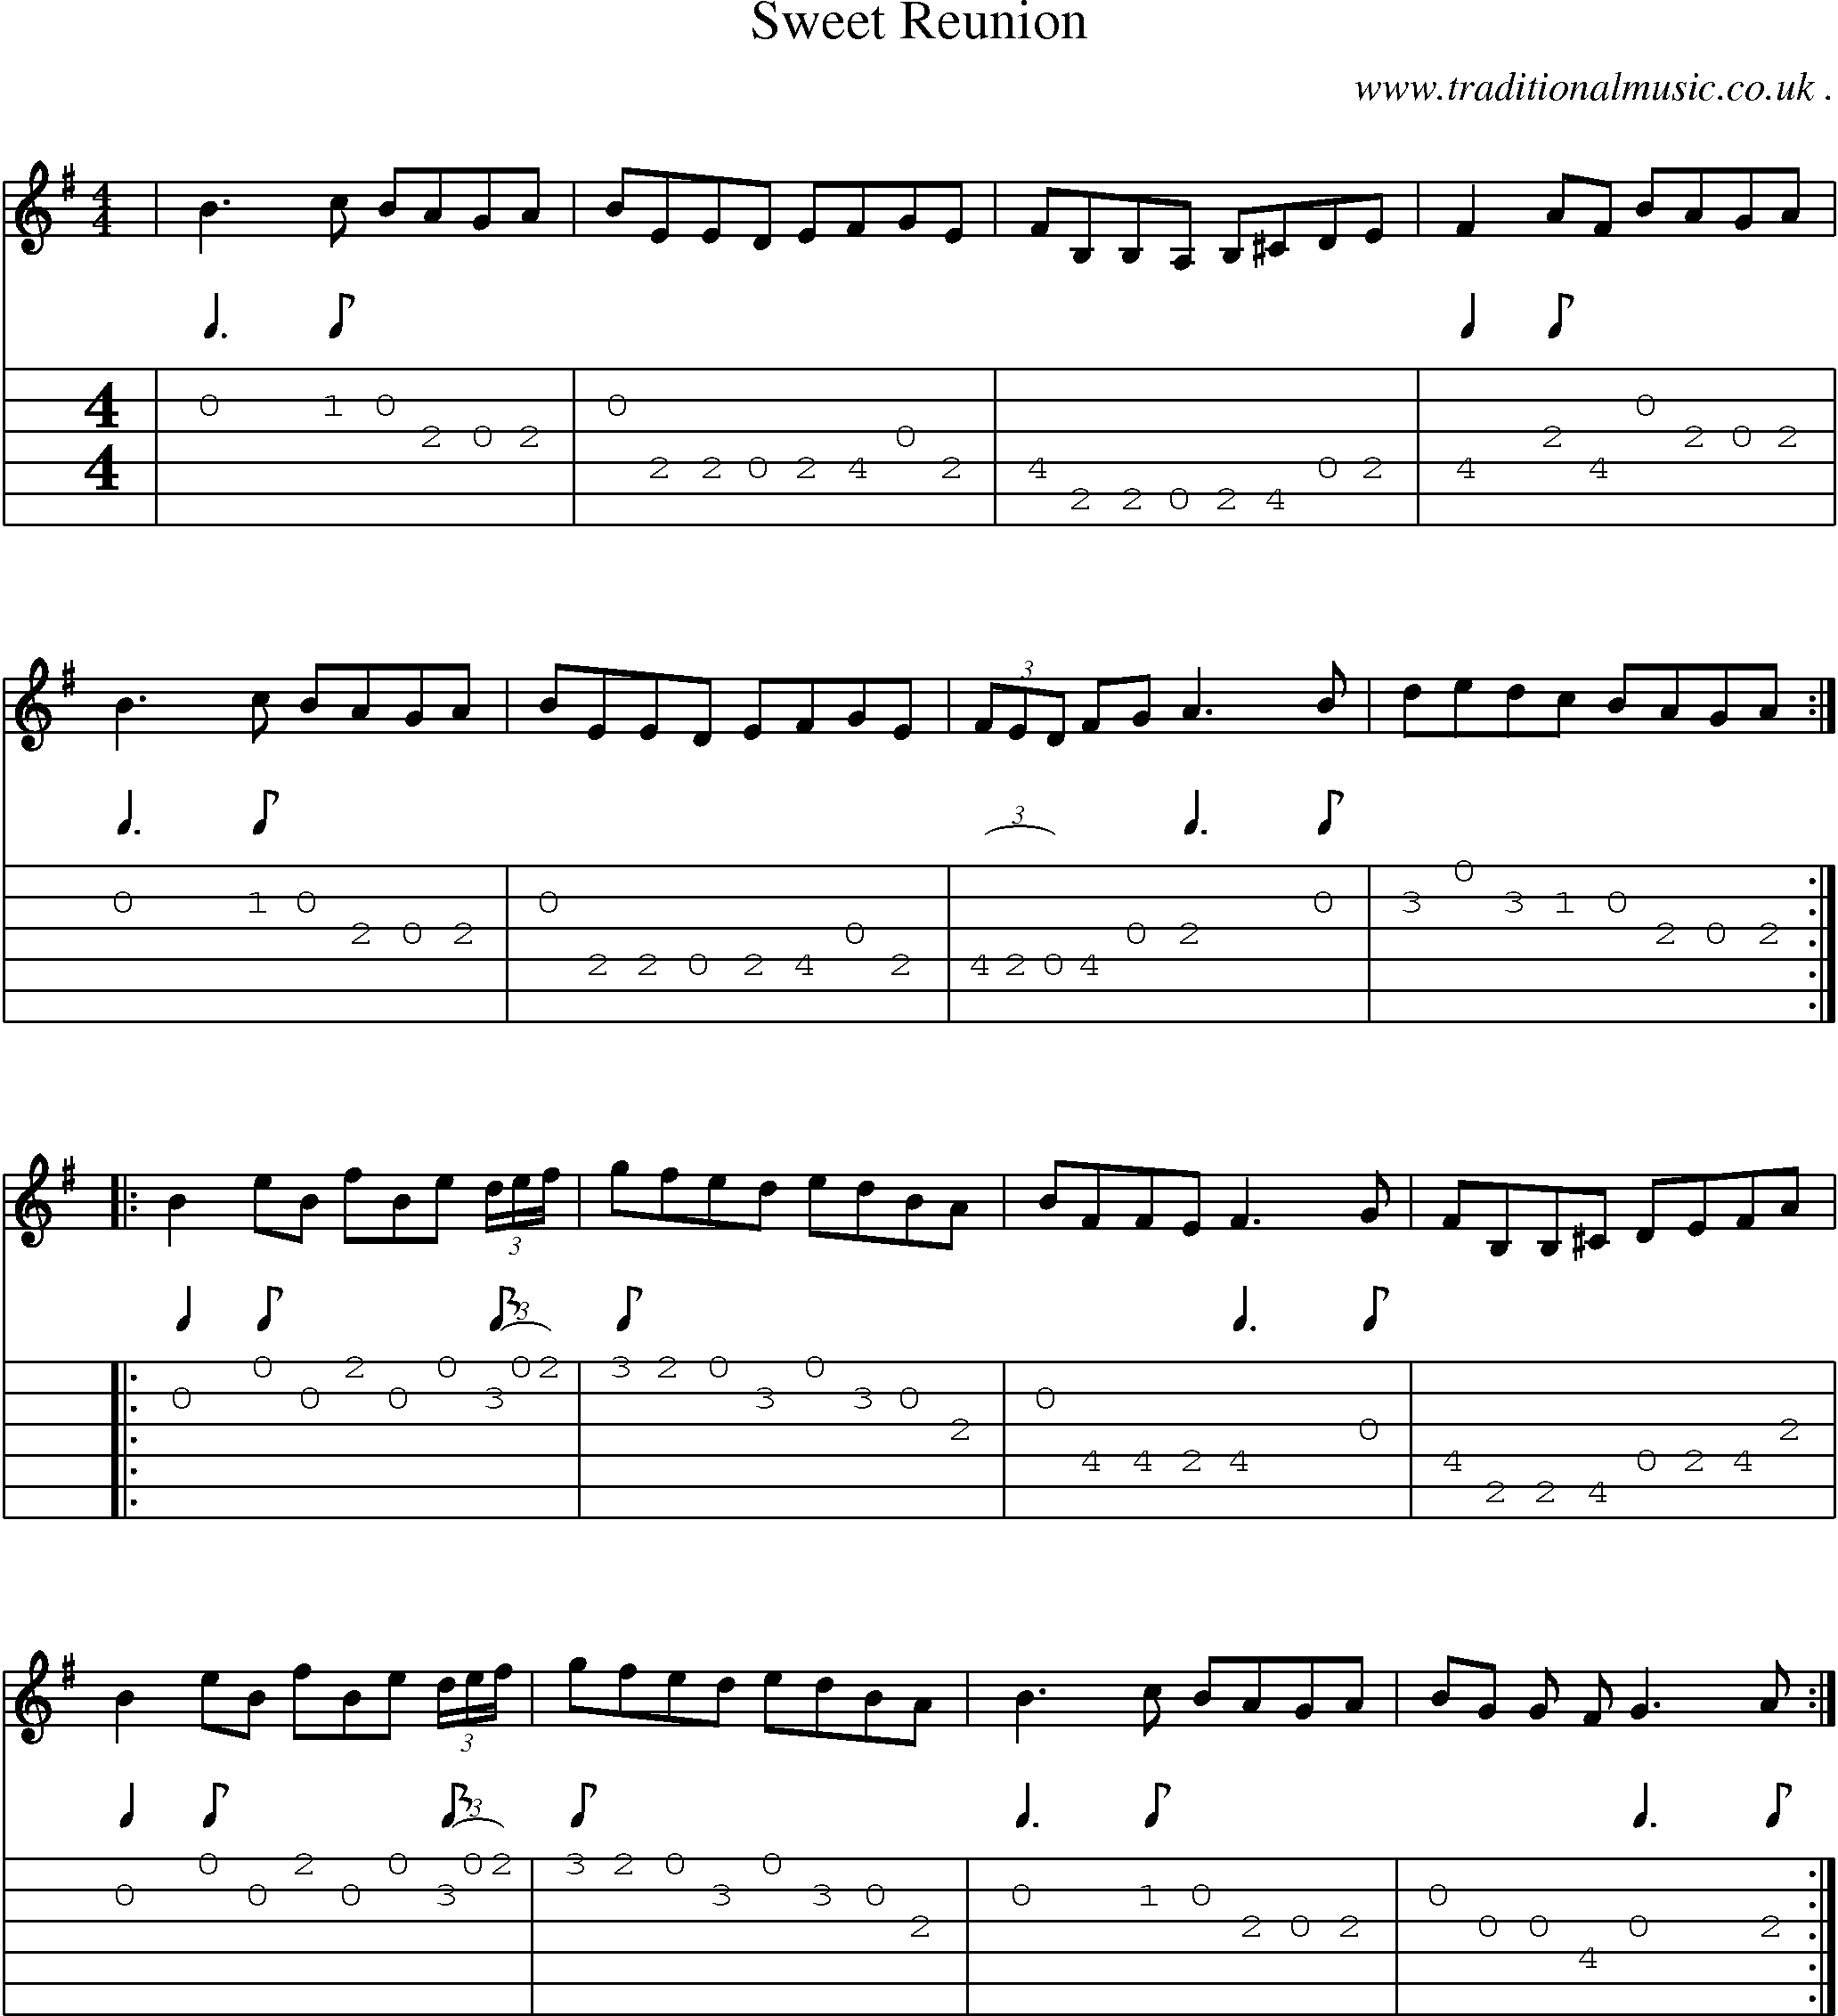 Sheet-Music and Guitar Tabs for Sweet Reunion